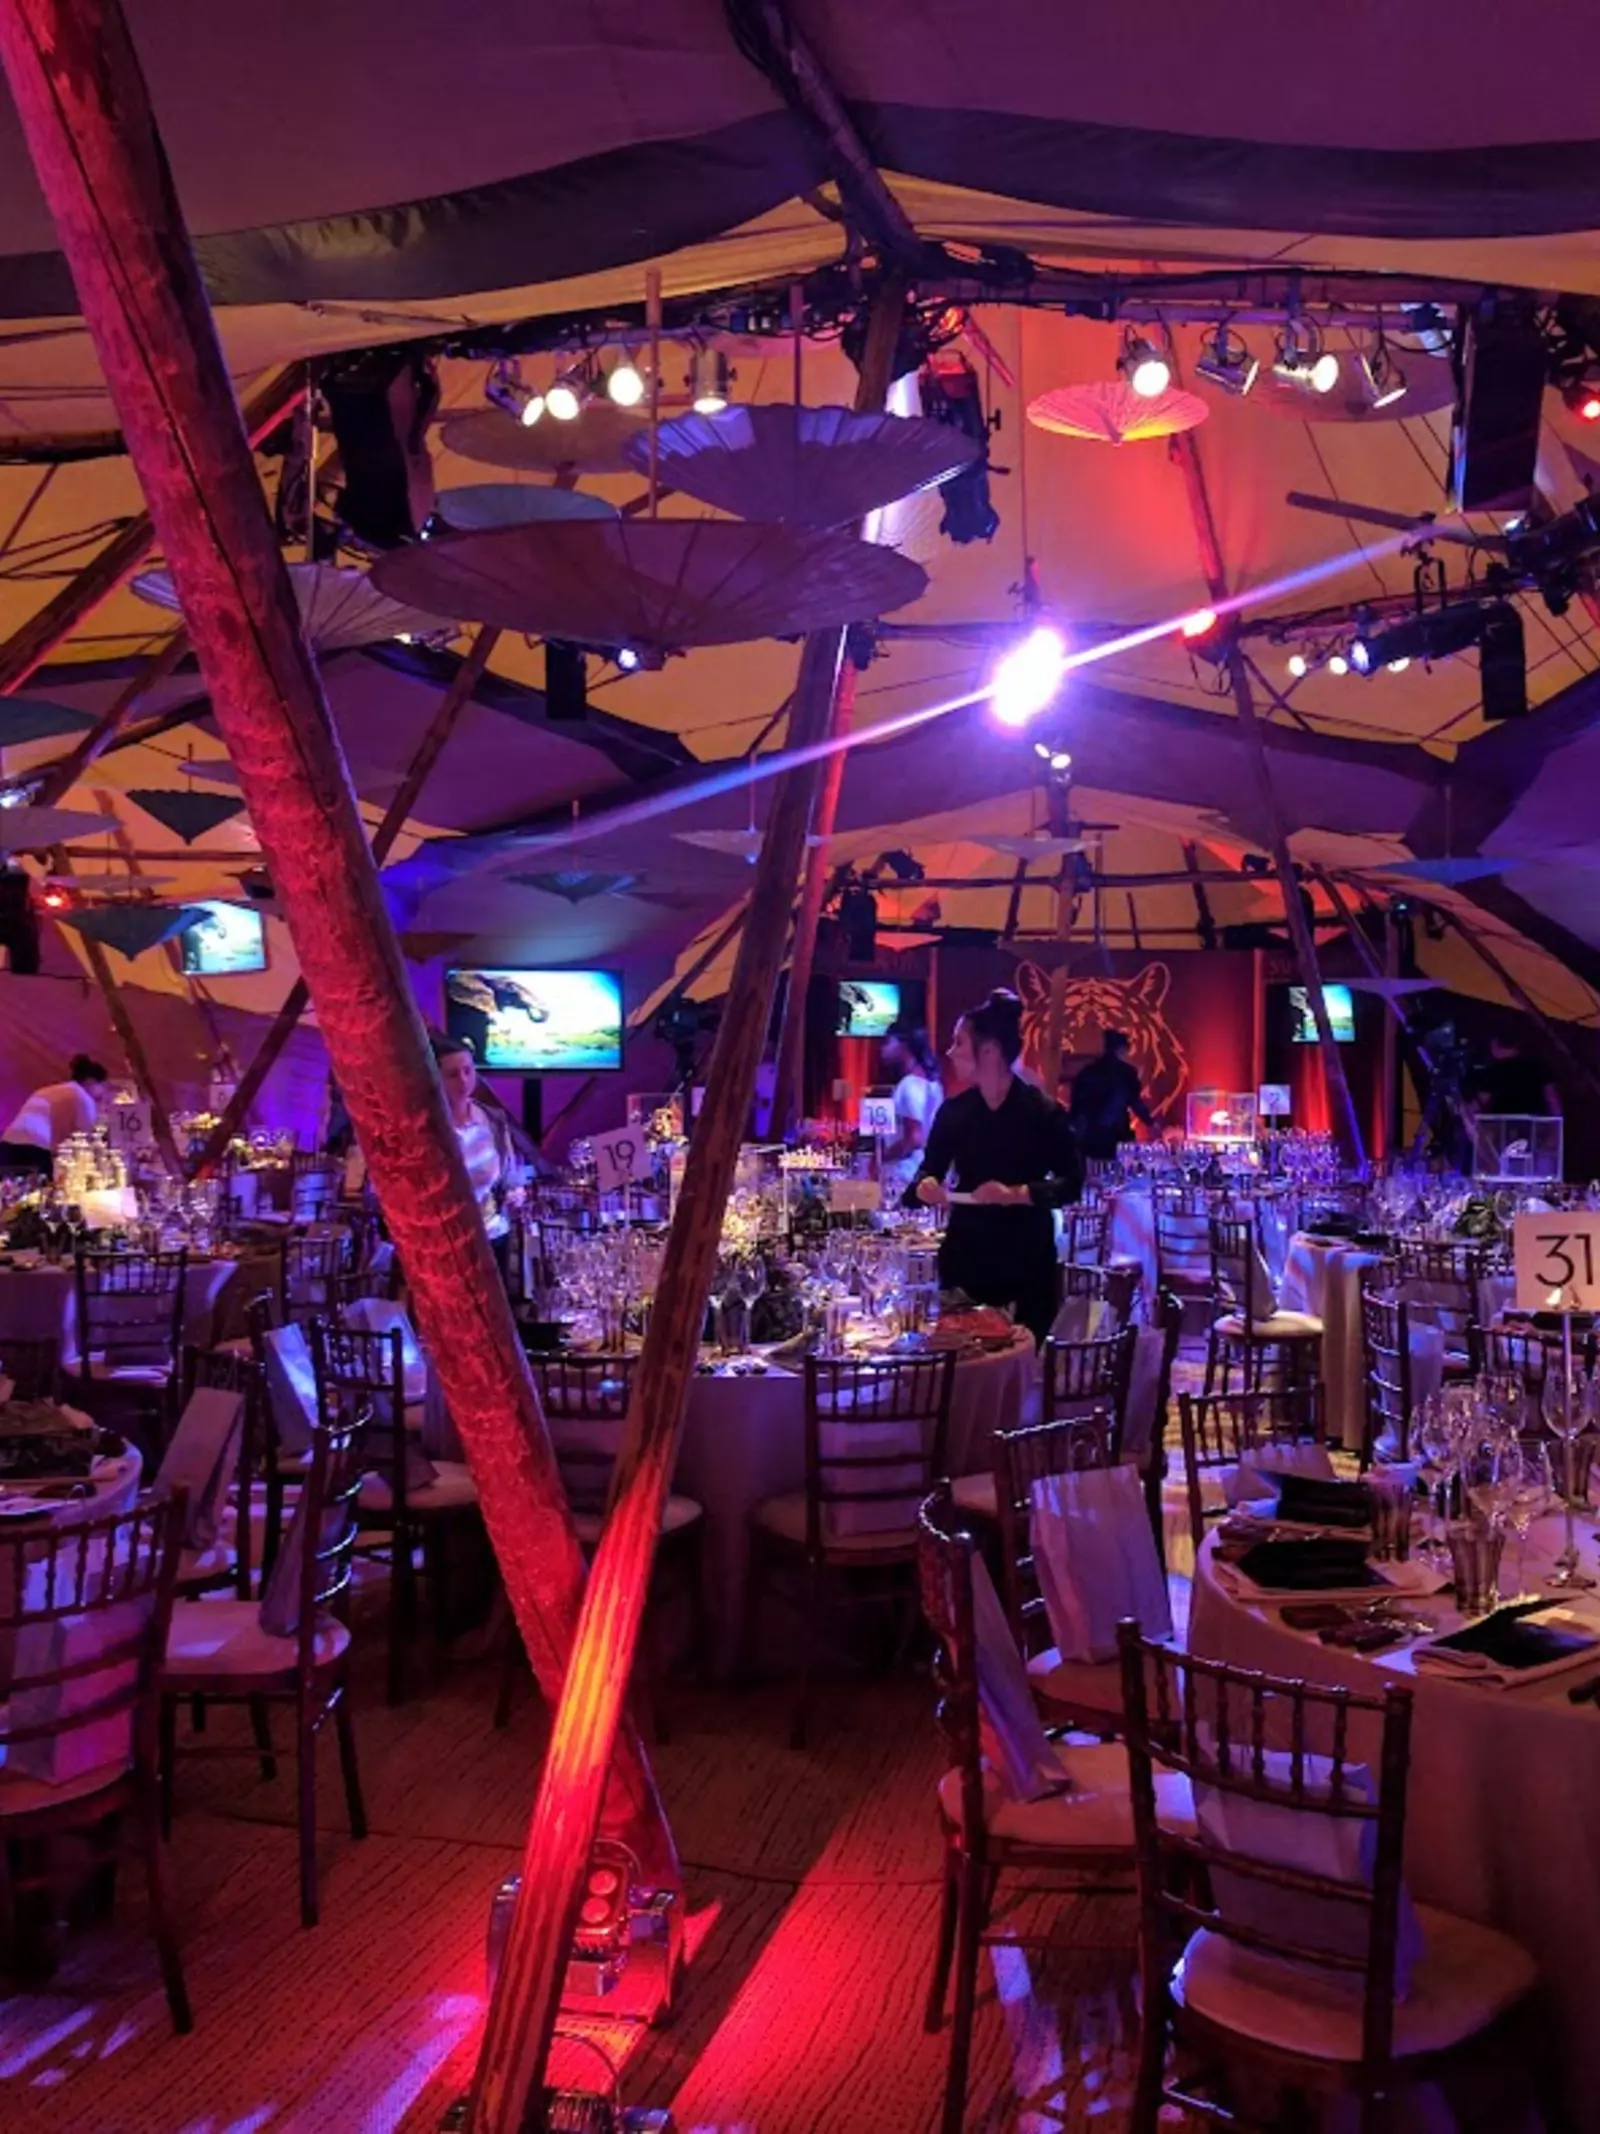 The gala fundraising event at London Zoo